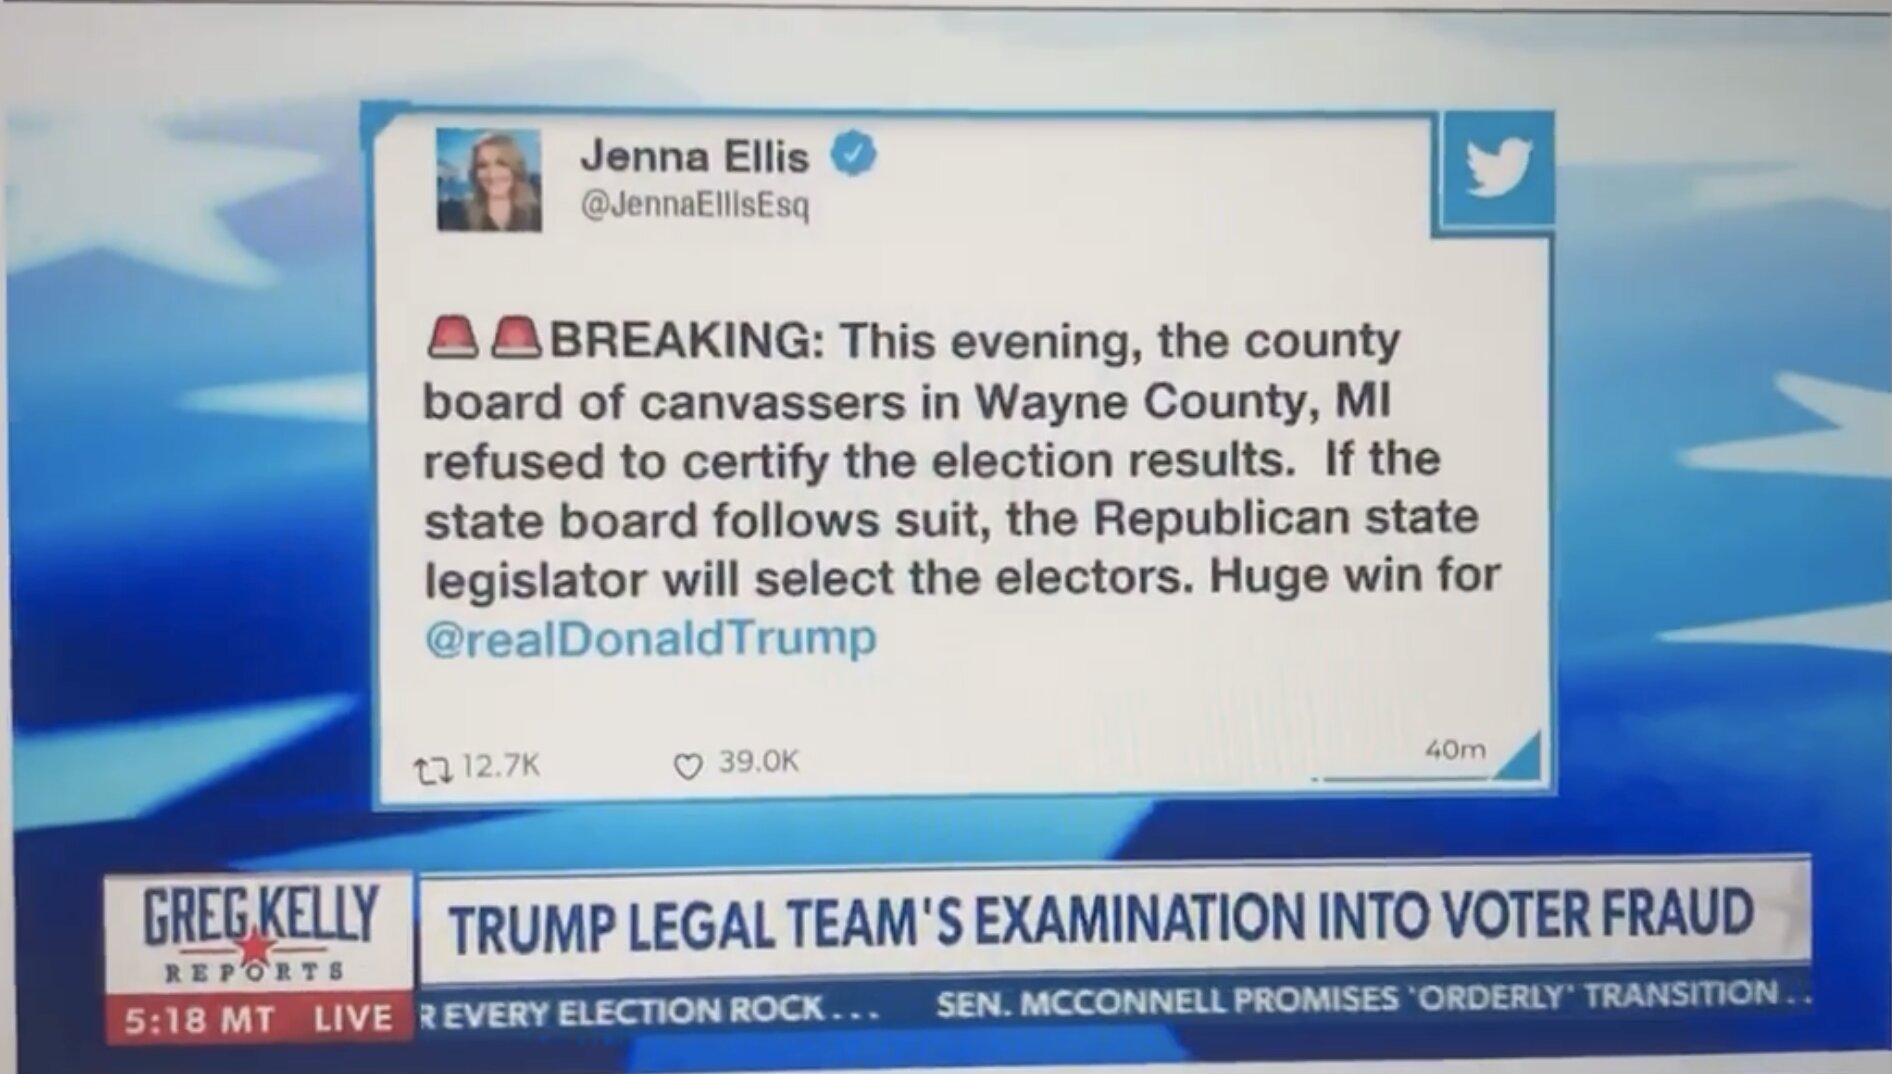 Big win for Trump in MI: County board of canvassers in Wayne County refused to certify the election results. Republican state legislator may select the electors!!!